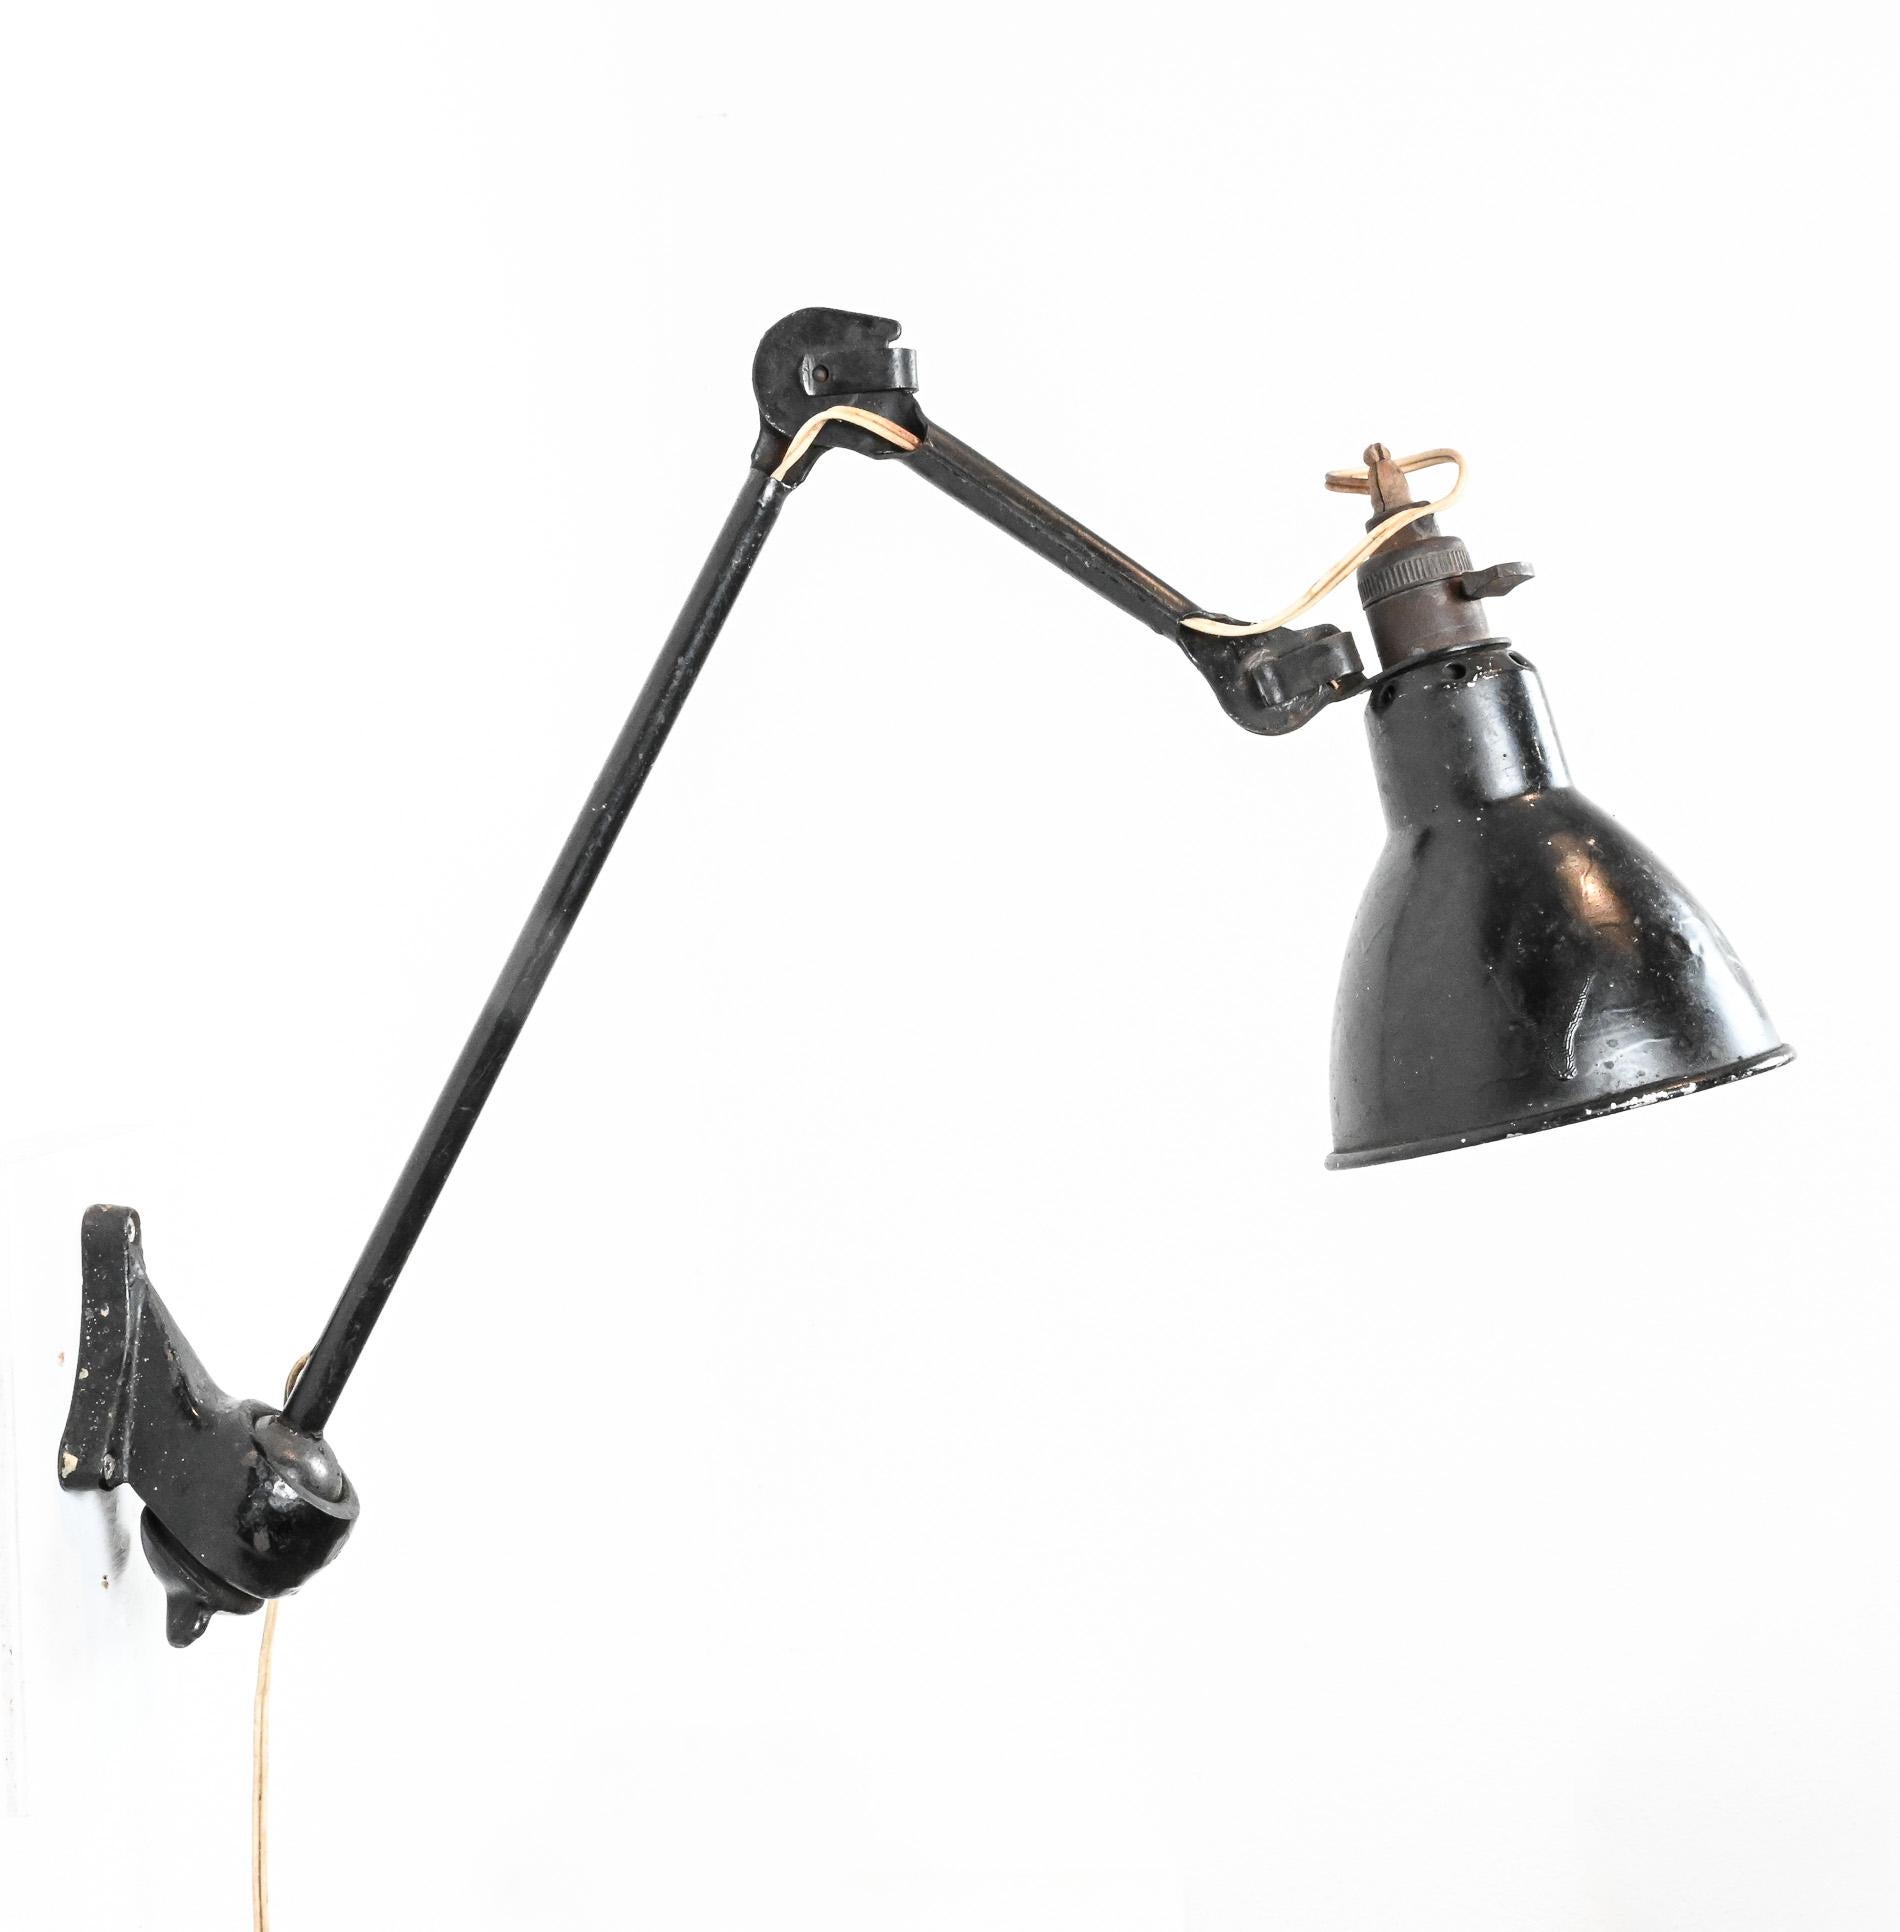 Gras wall lamp produced in 1930. Black metal structure and lampshade. Original and vintage model.
Electrics refurbished with original B22 socket lamp, black cotton thread.
Gras lamp became famous when Le Corbusier started to use them first in his